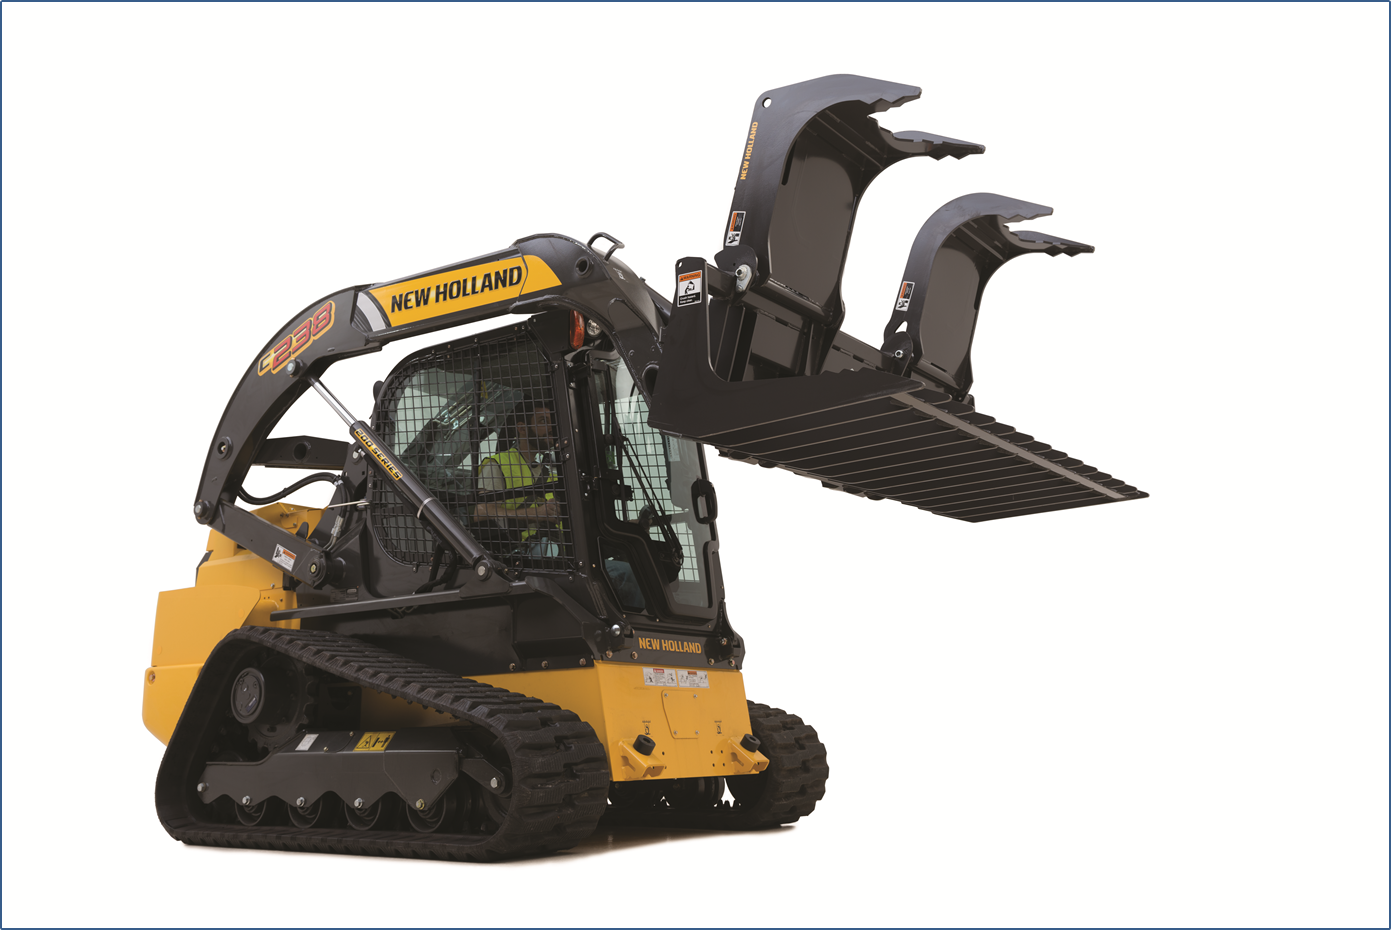 New Holland CTL featuring updated low-profile undercarriage design